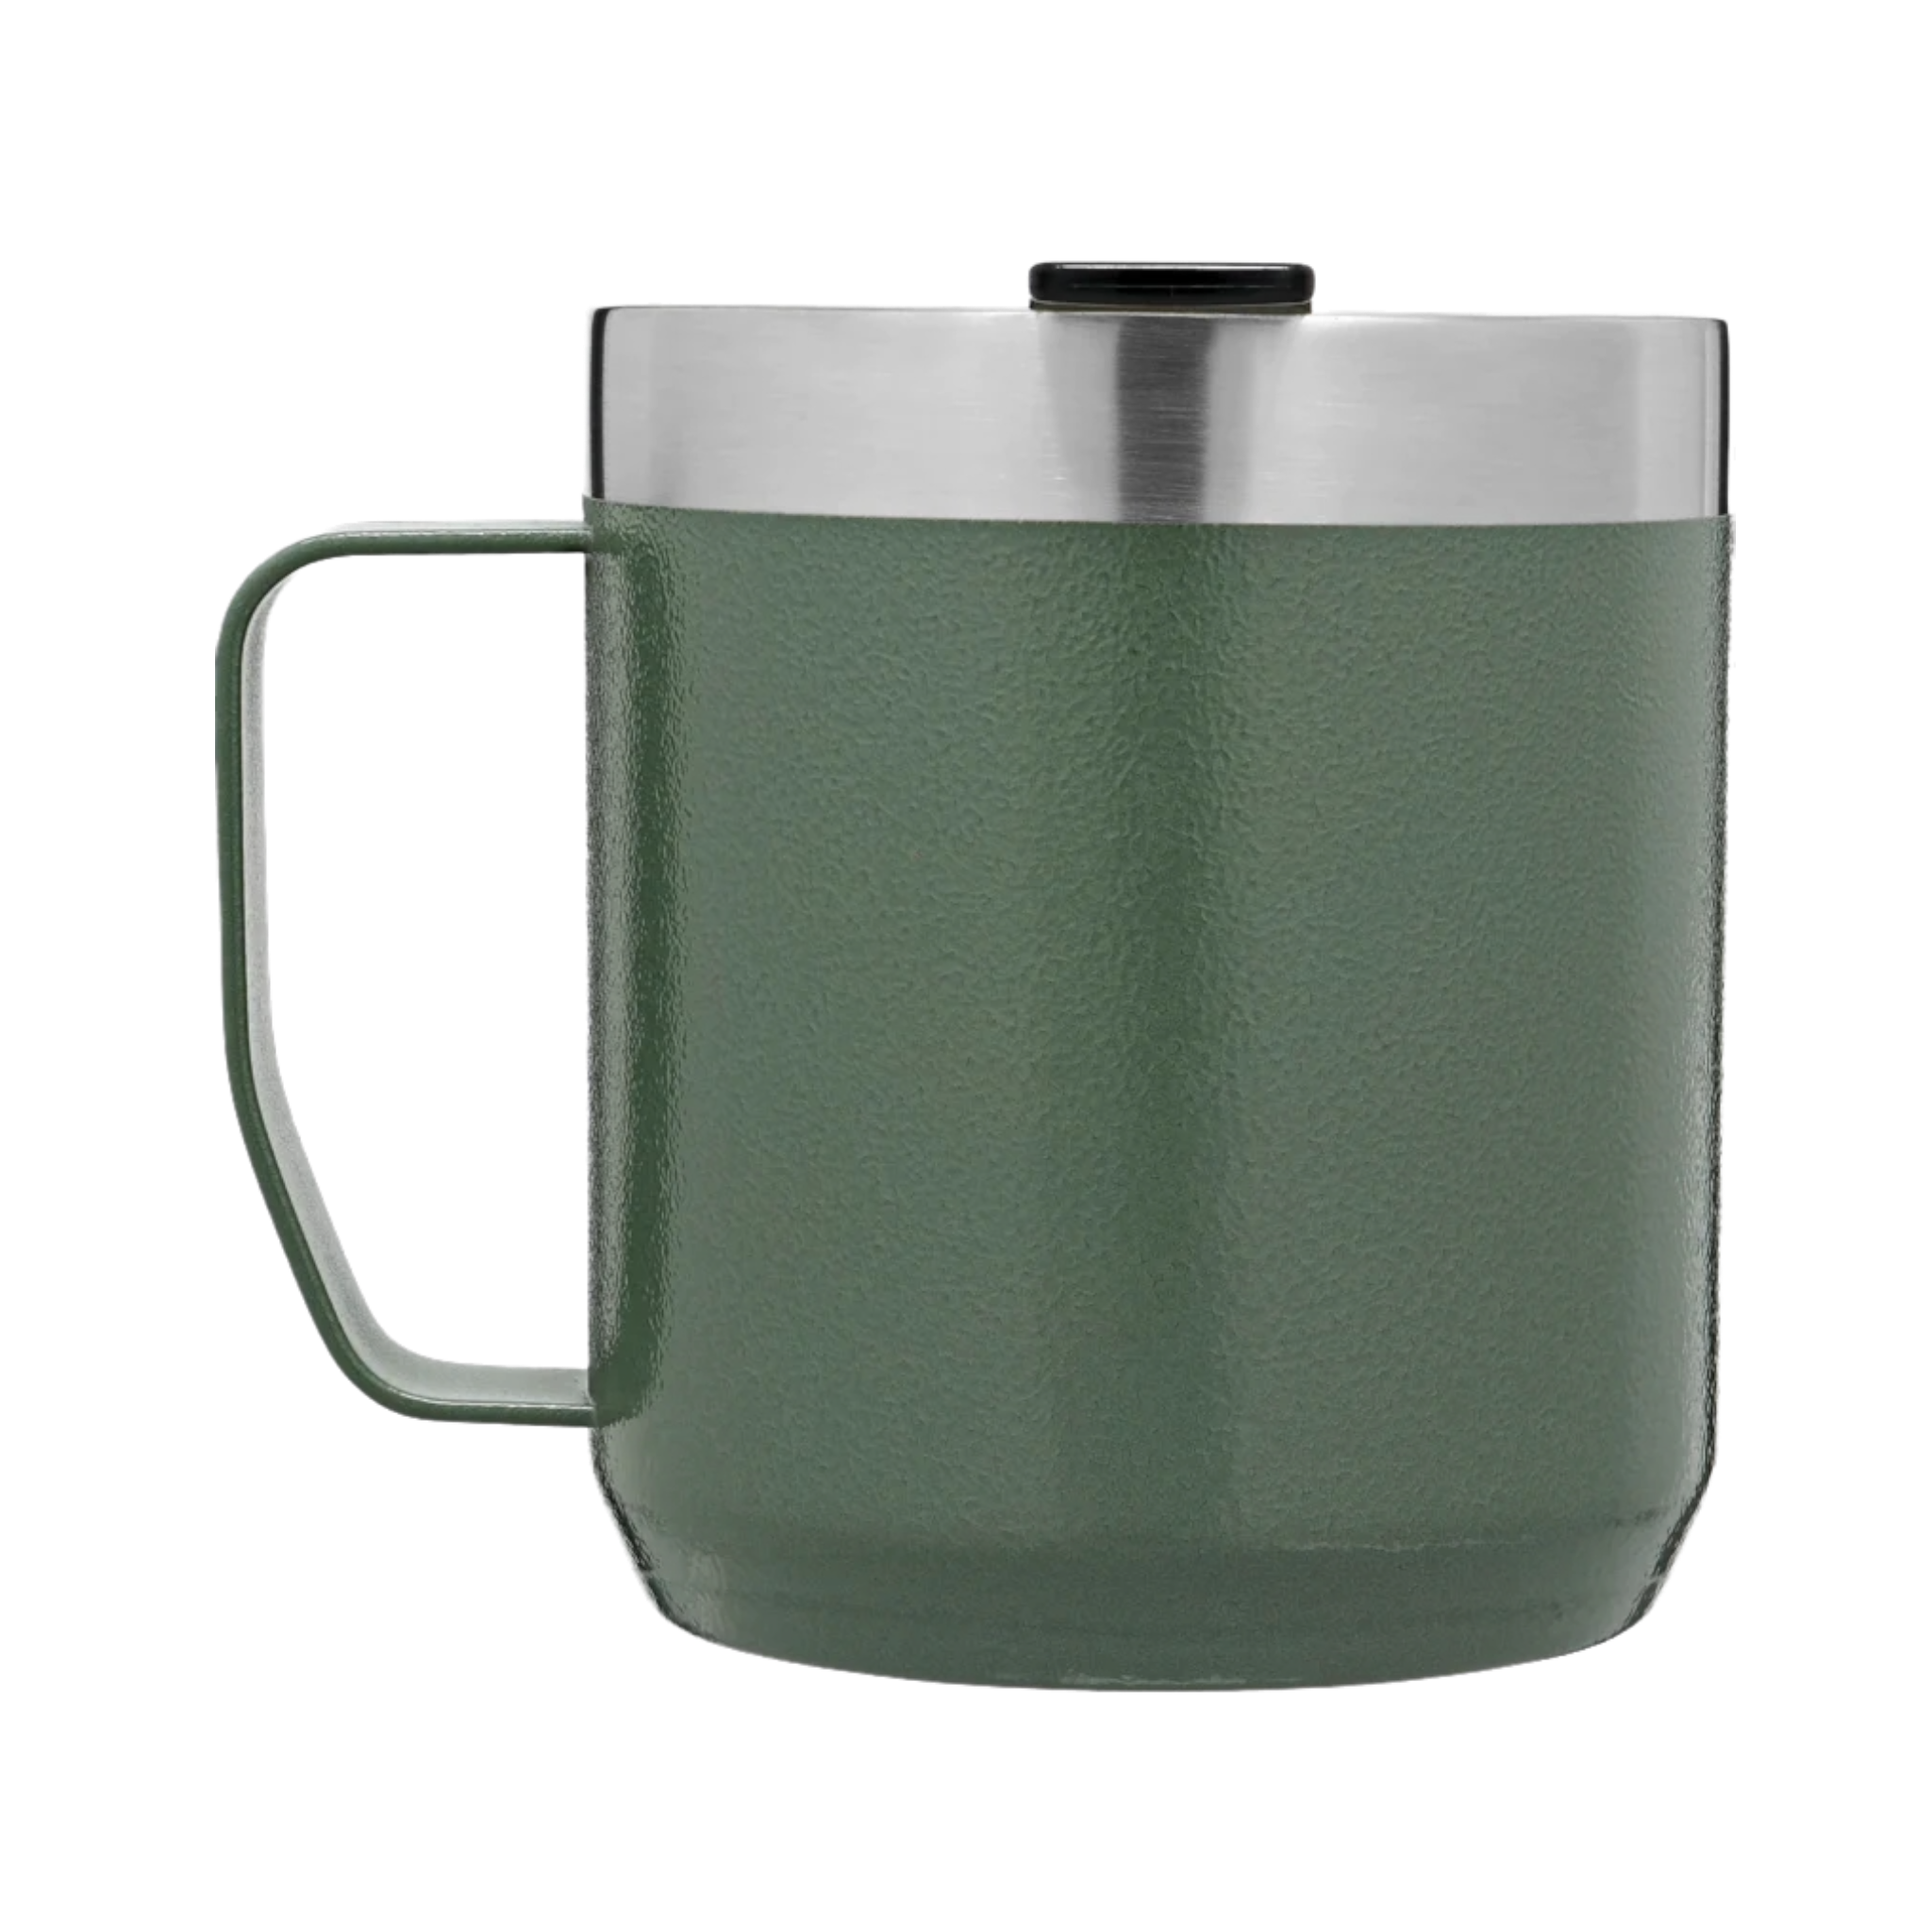 Stanley Classic Legendary 12 oz Camp Mug  Urban Outfitters Japan -  Clothing, Music, Home & Accessories